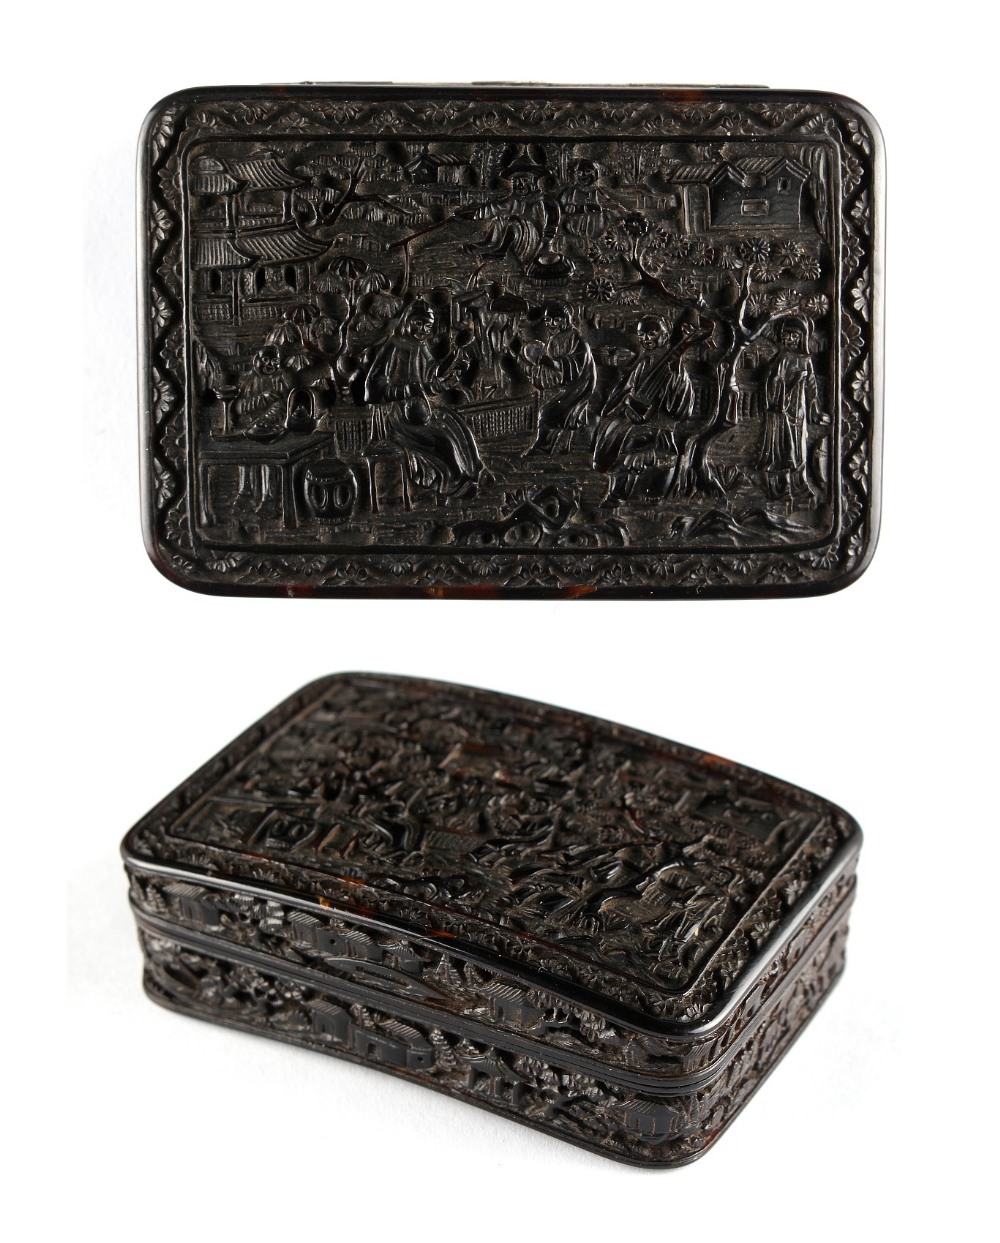 A 19th century Chinese carved tortoiseshell rectangular box, of slightly domed form, carved with